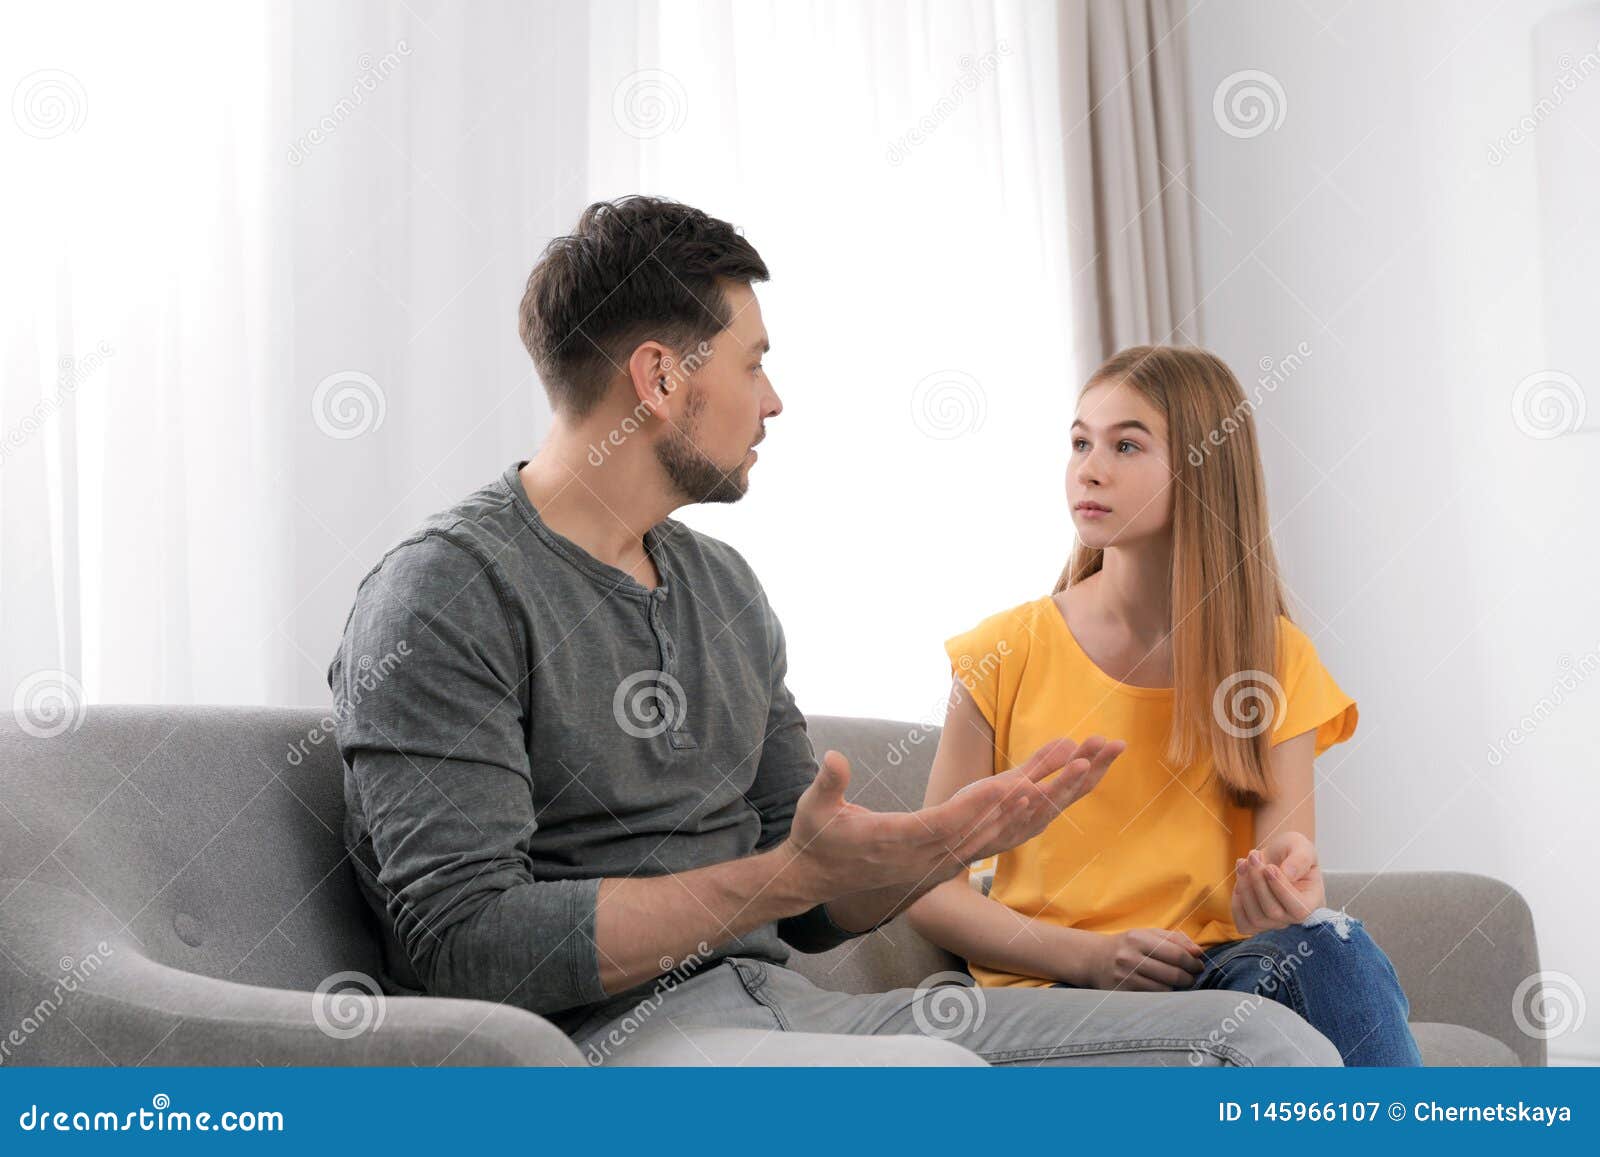 Father Talking With His Teenager Daughter Stock Image